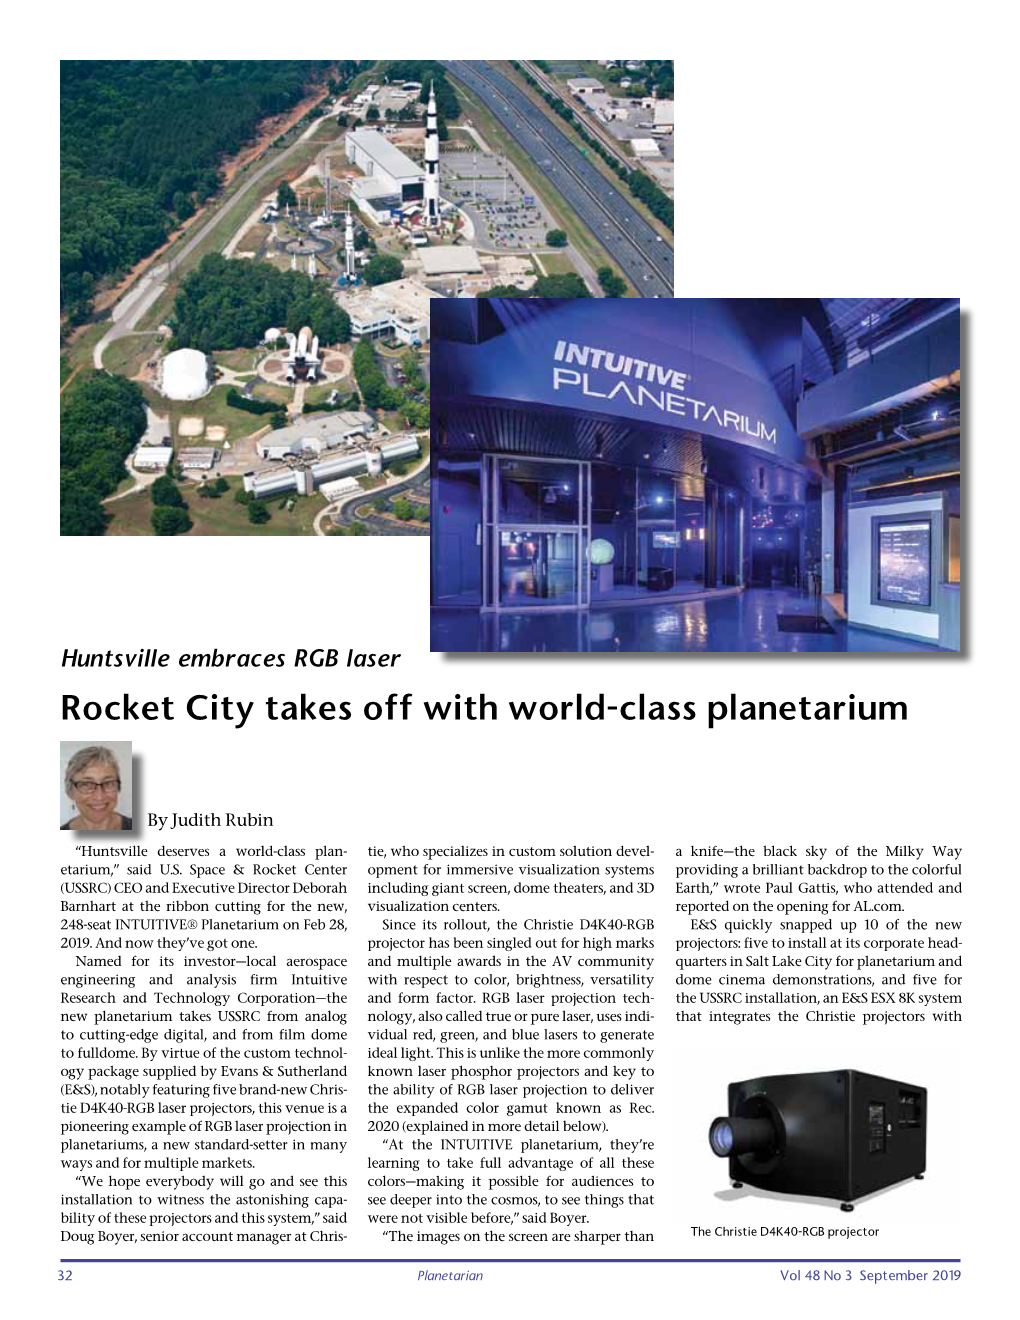 Rocket City Takes Off with World-Class Planetarium